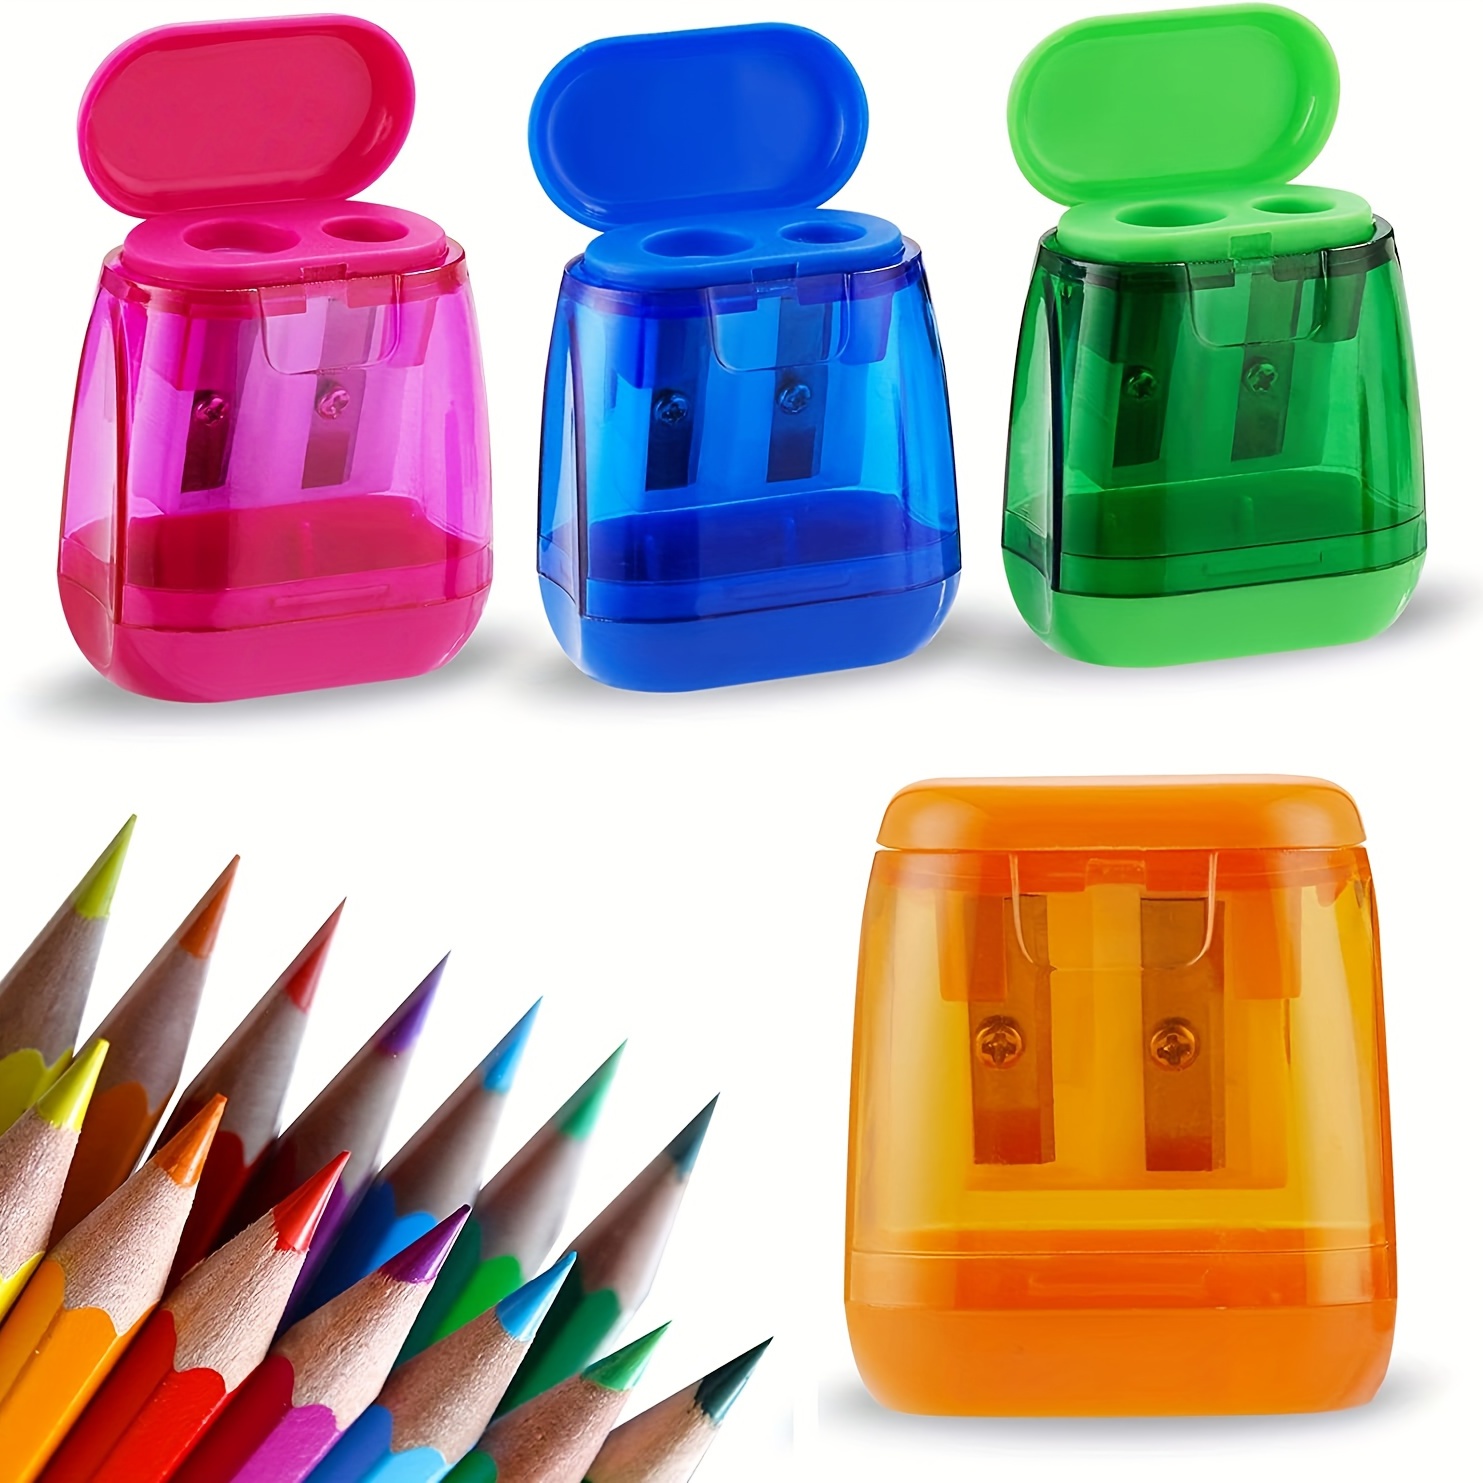 Cute Pencil Sharpeners Manual for Kids and Artists, Handheld Manual Pencil  Sharpener for Colored Pencils - blue